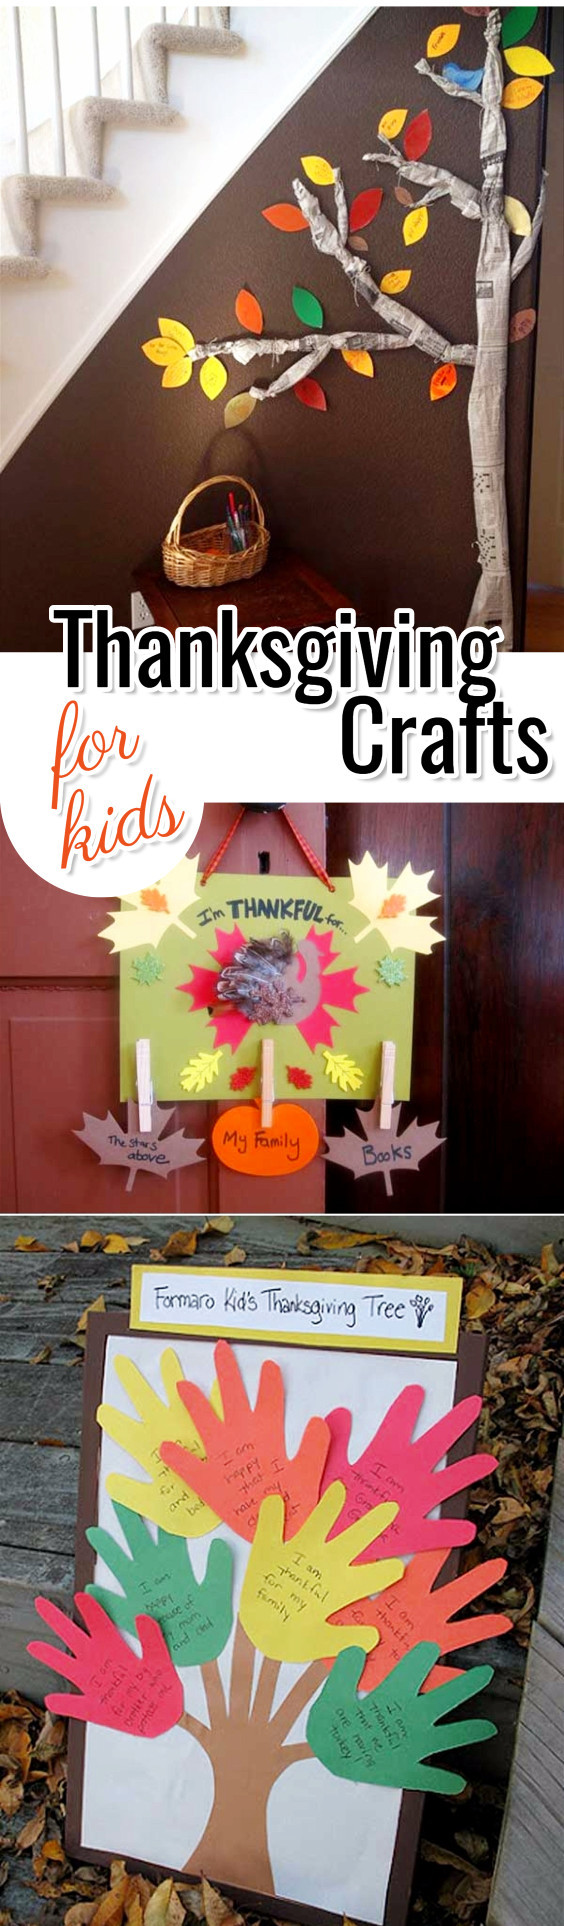 Thanksgiving 2020 Crafts
 Thanksgiving Crafts for Kids Easy Preschool Toddler & Pre